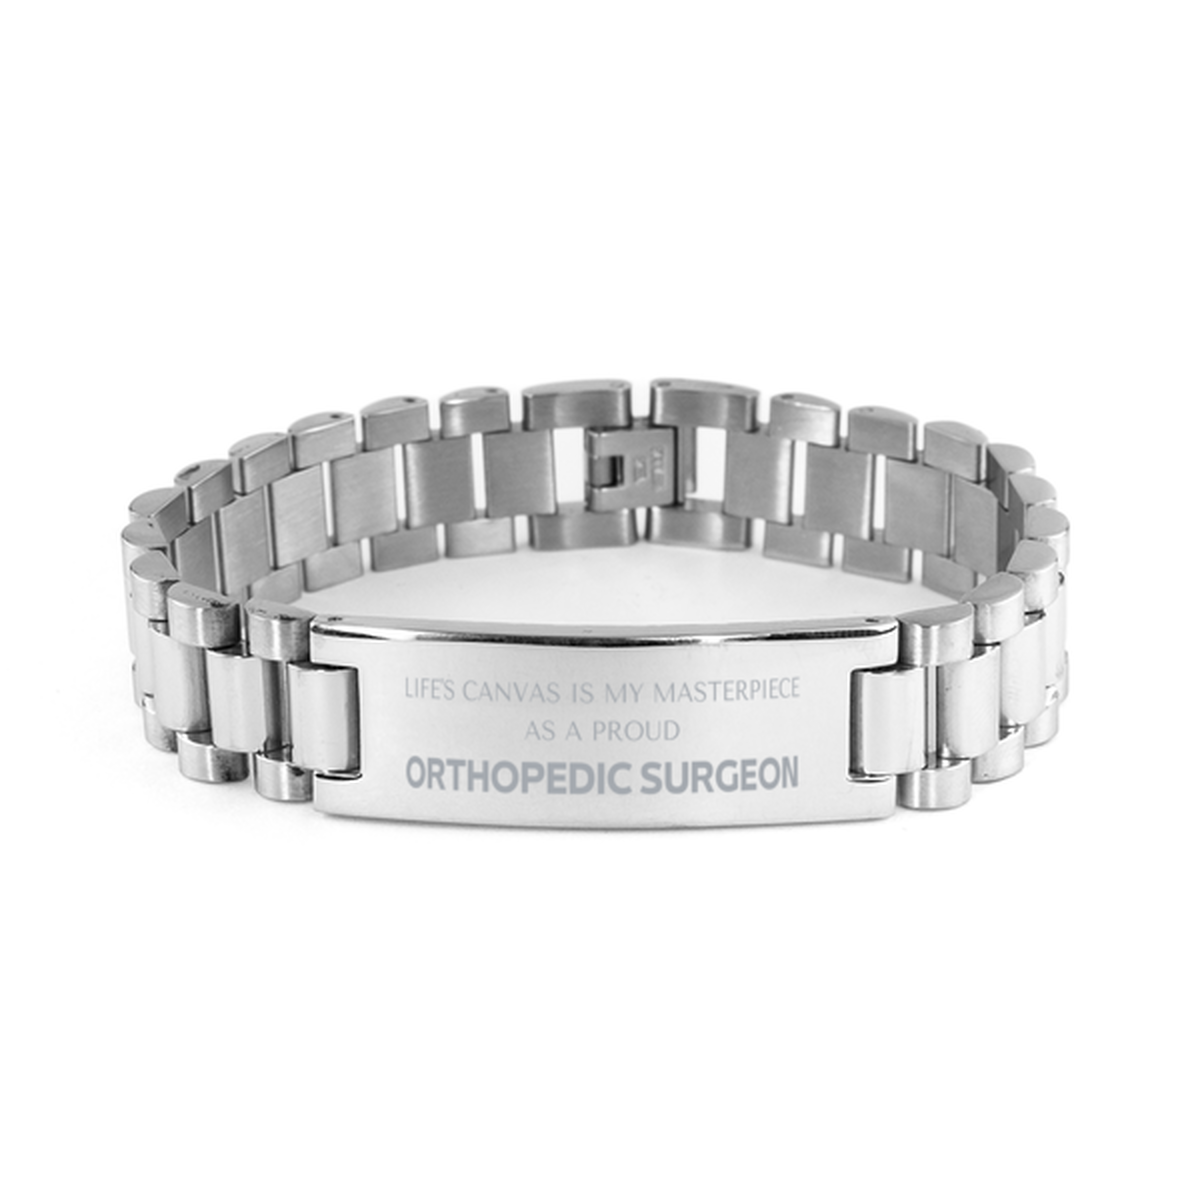 Proud Orthopedic Surgeon Gifts, Life's canvas is my masterpiece, Epic Birthday Christmas Unique Ladder Stainless Steel Bracelet For Orthopedic Surgeon, Coworkers, Men, Women, Friends